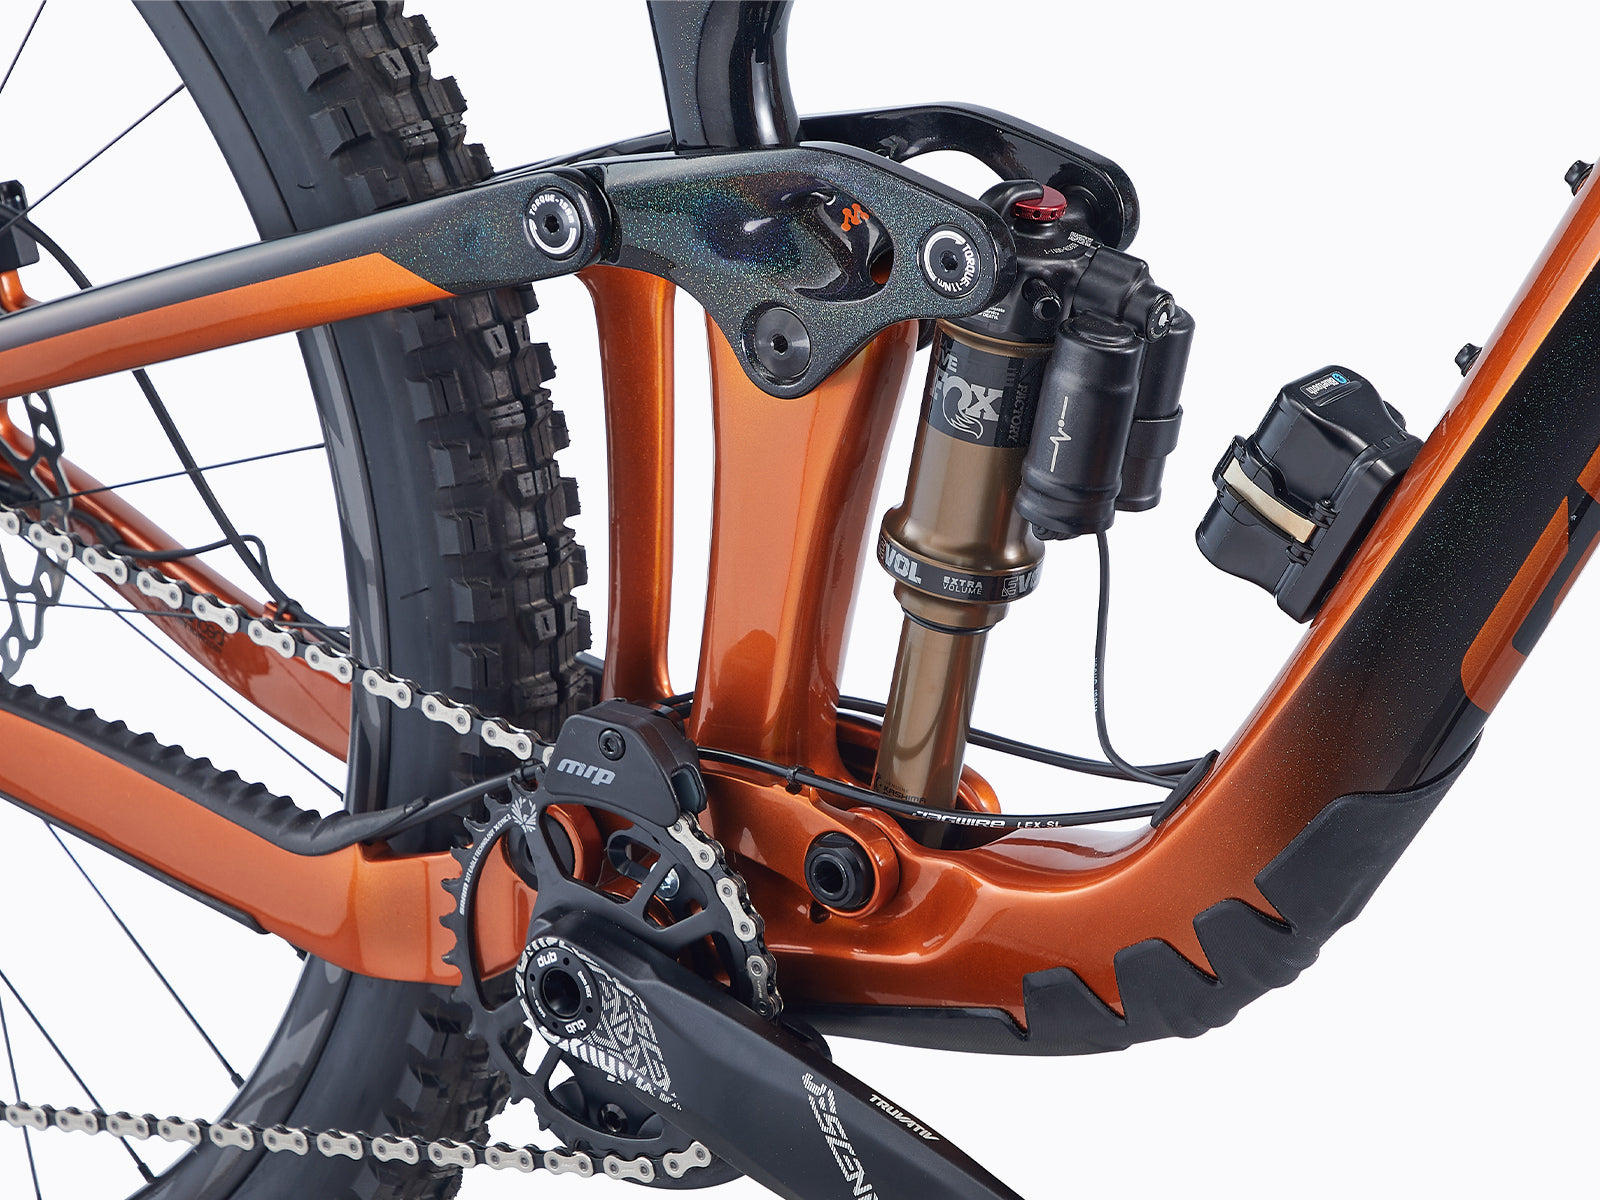 Image shows, giant reign advanced pro 29 1, a downhill mountain bike from Giant now sold at Giant Melbourne